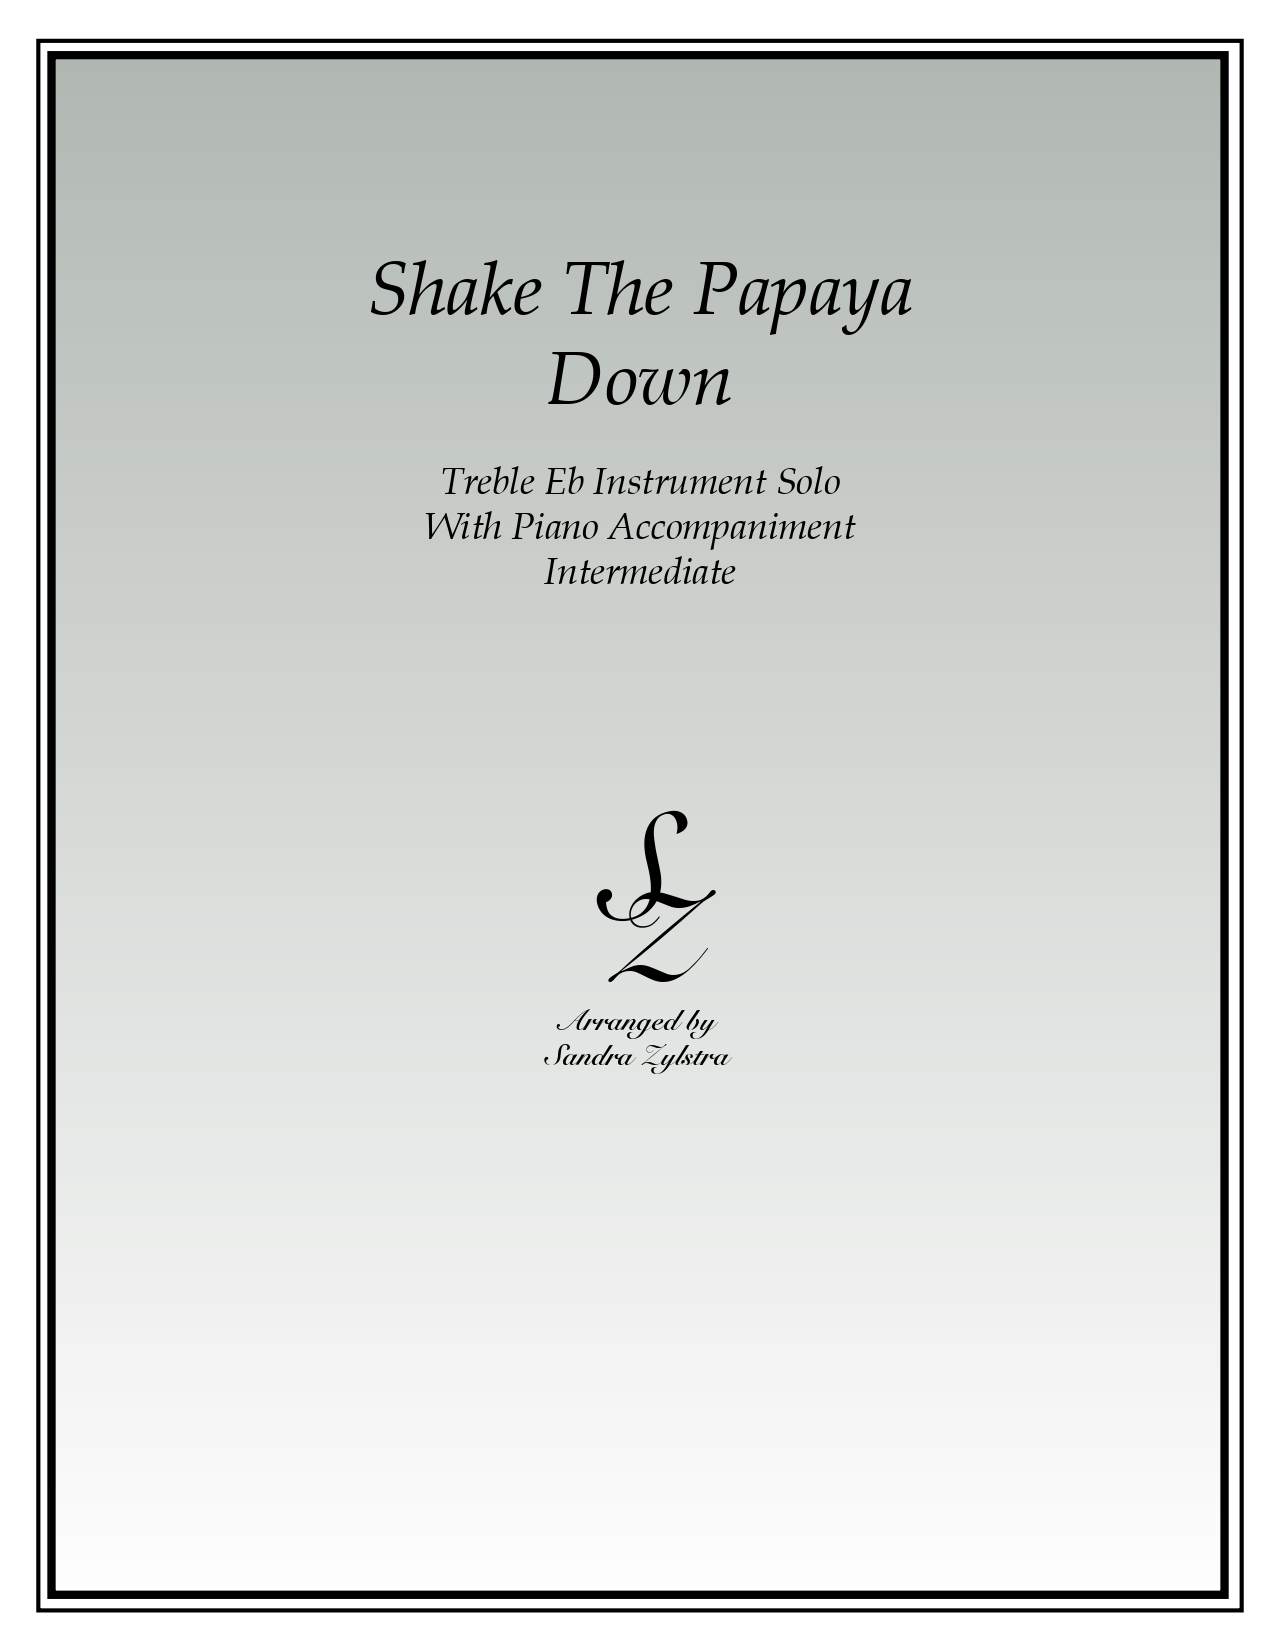 Shake The Papaya Down Eb instrument solo part cover page 00011